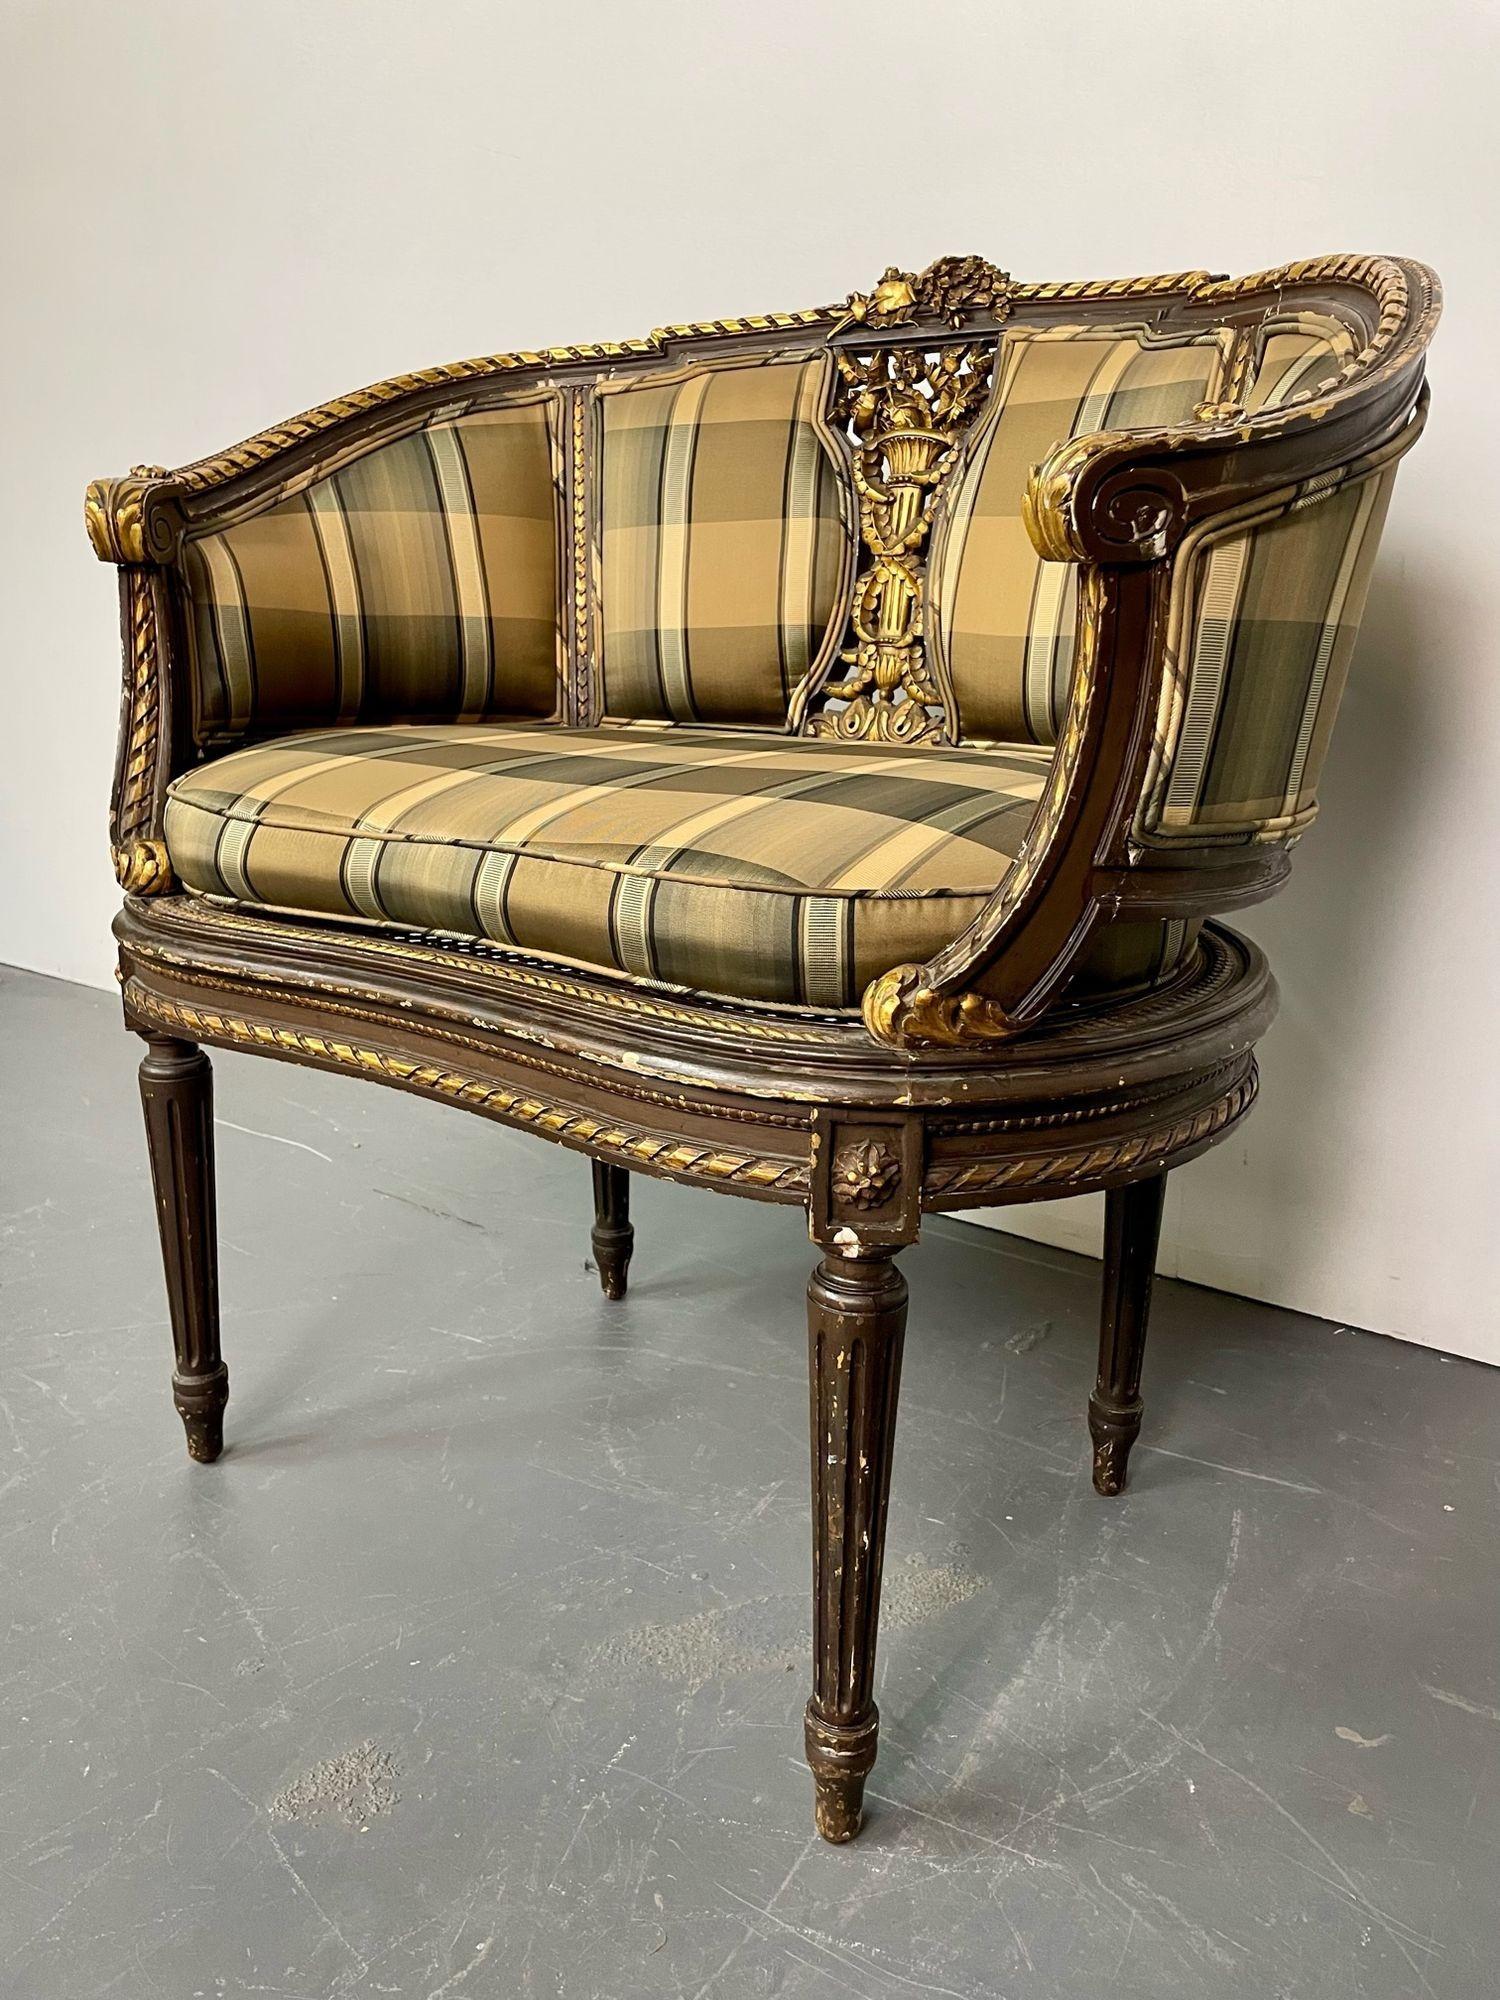 French Louis XVI Chair Signed Guillaume Grohe, Gilt, 19th Century